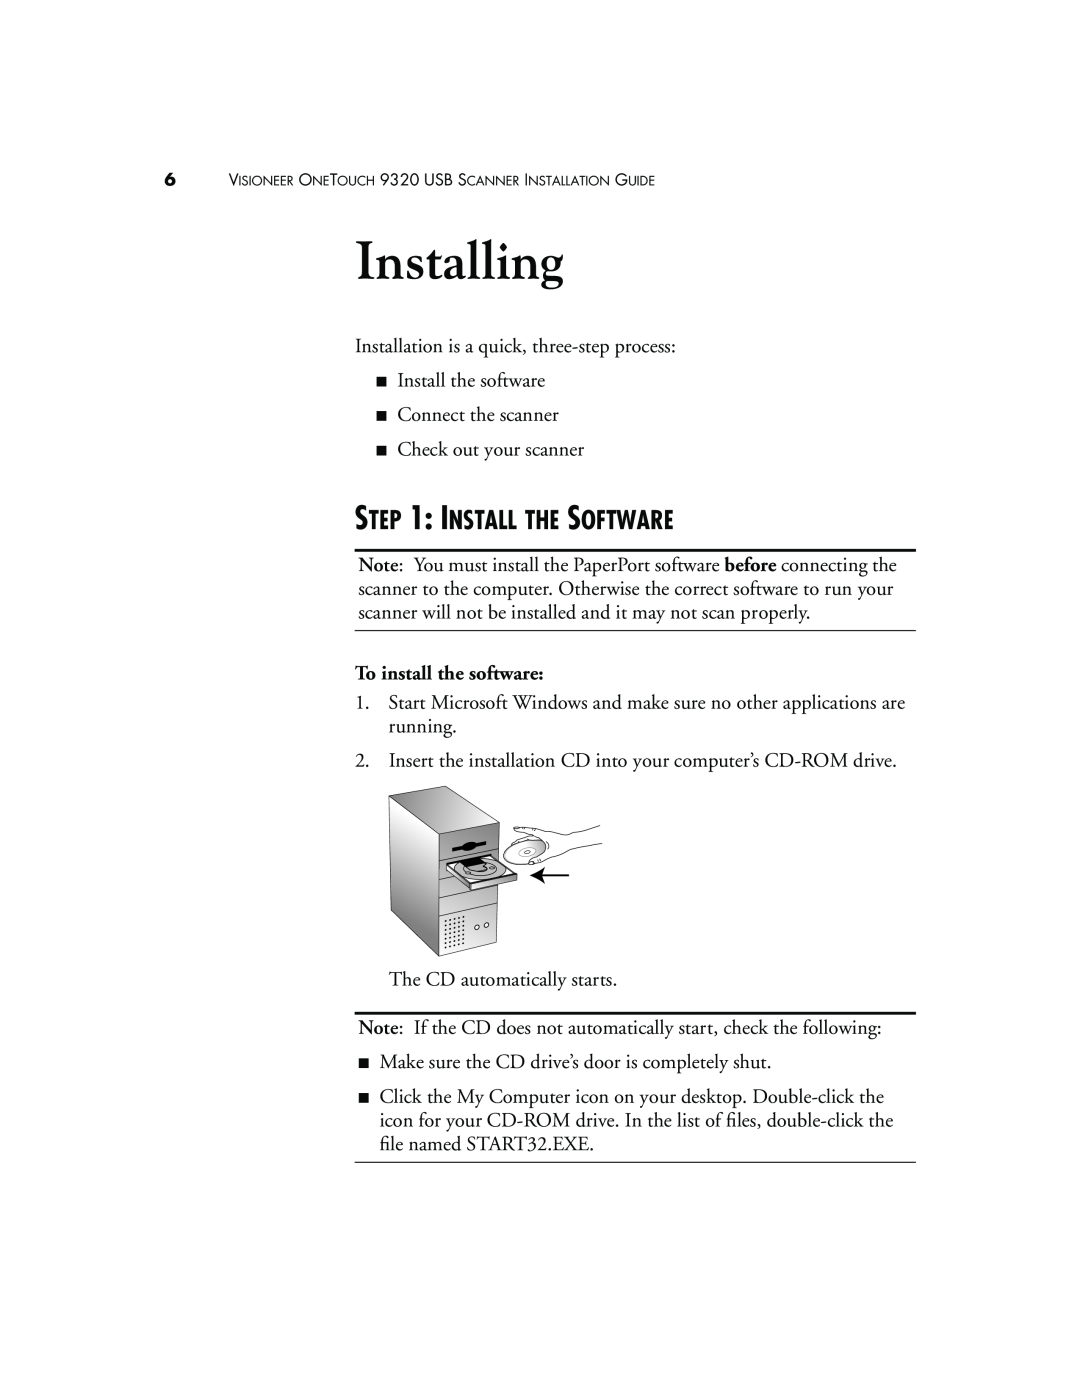 Visioneer 9320 manual Installing, Install The Software 